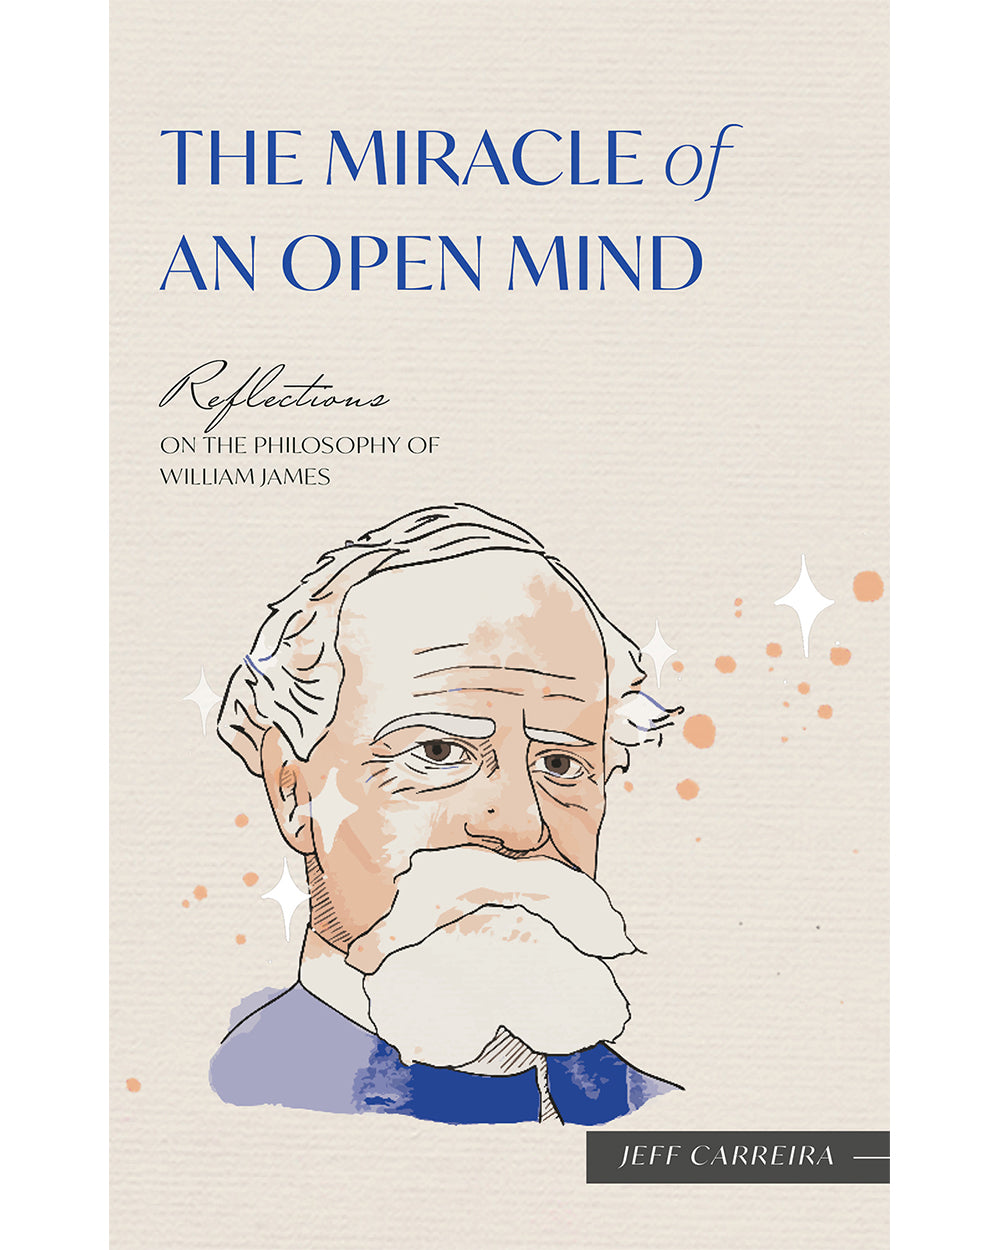 The Miracle of an Open Mind: Reflections on the Philosophy of William James